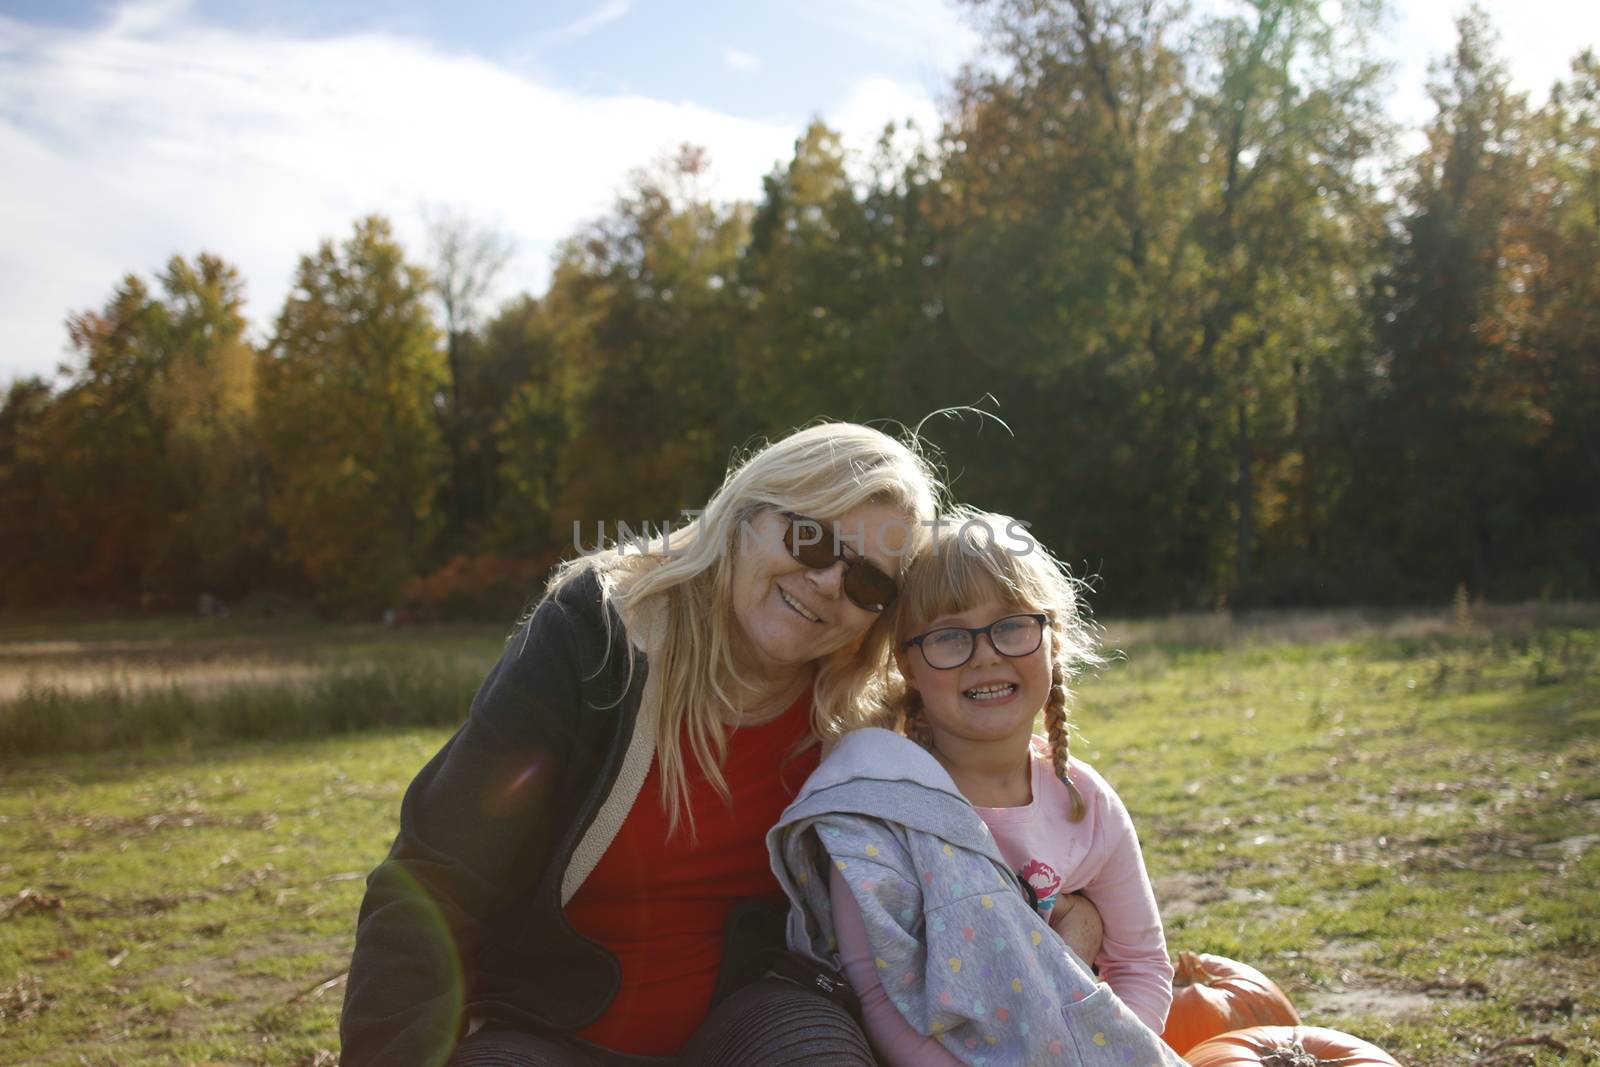 Grandma and granddaughter at a pumpkin patch enjoying the fall activity. Theme of multi-generational family activities..